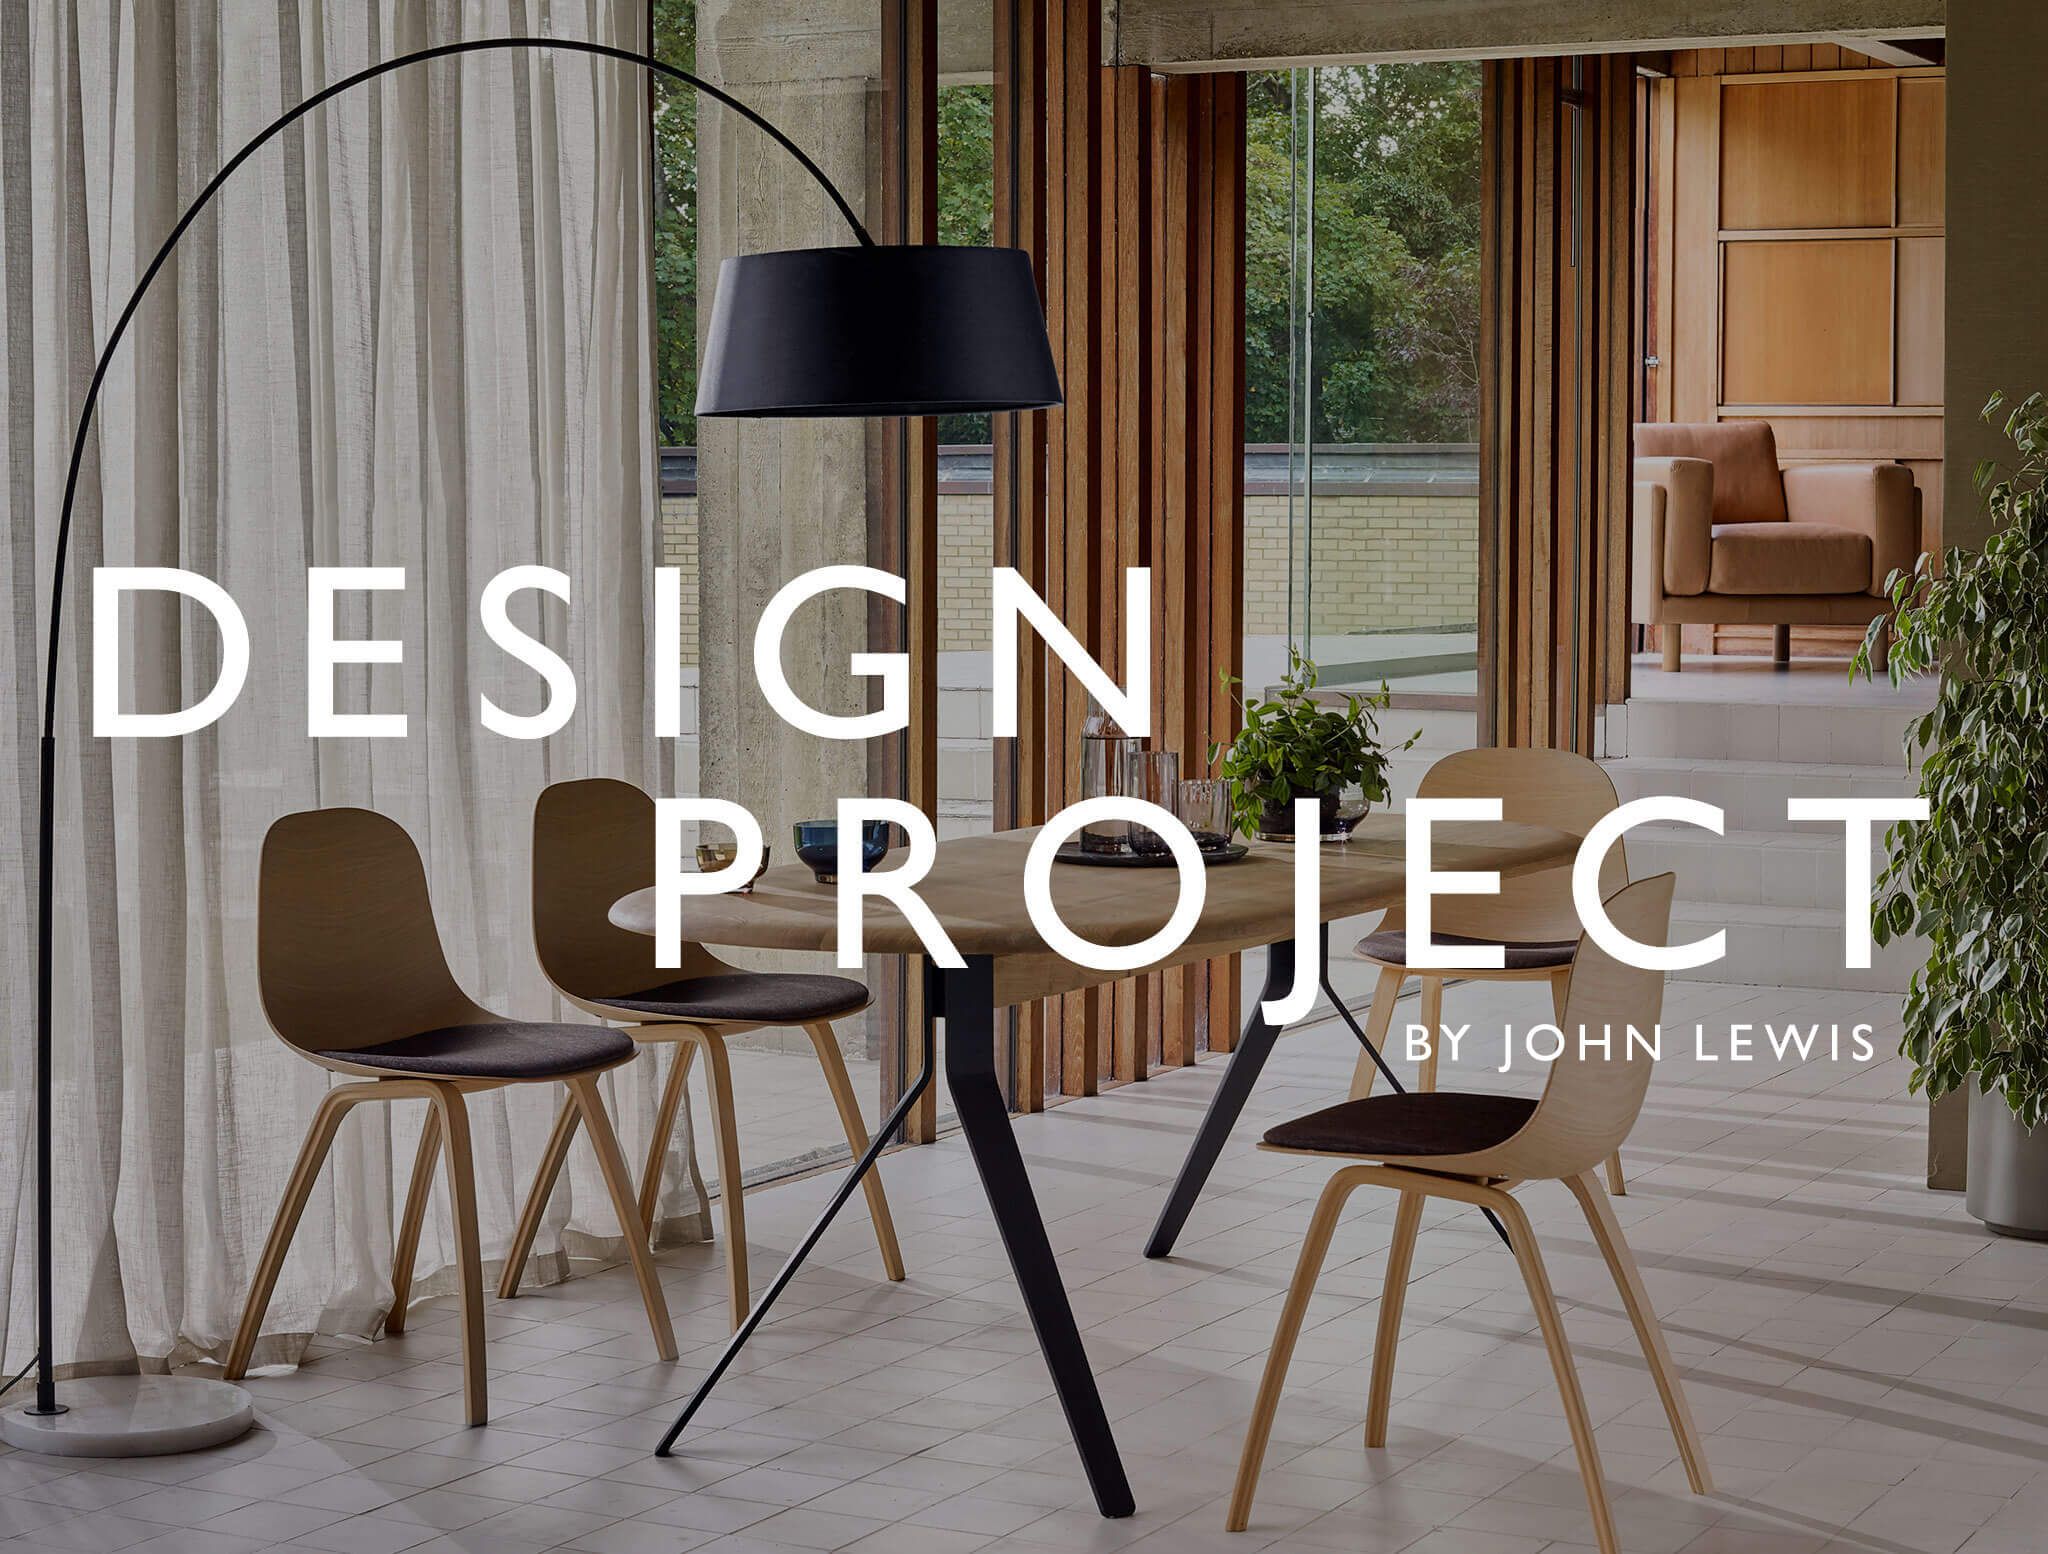 Design Project by John Lewis